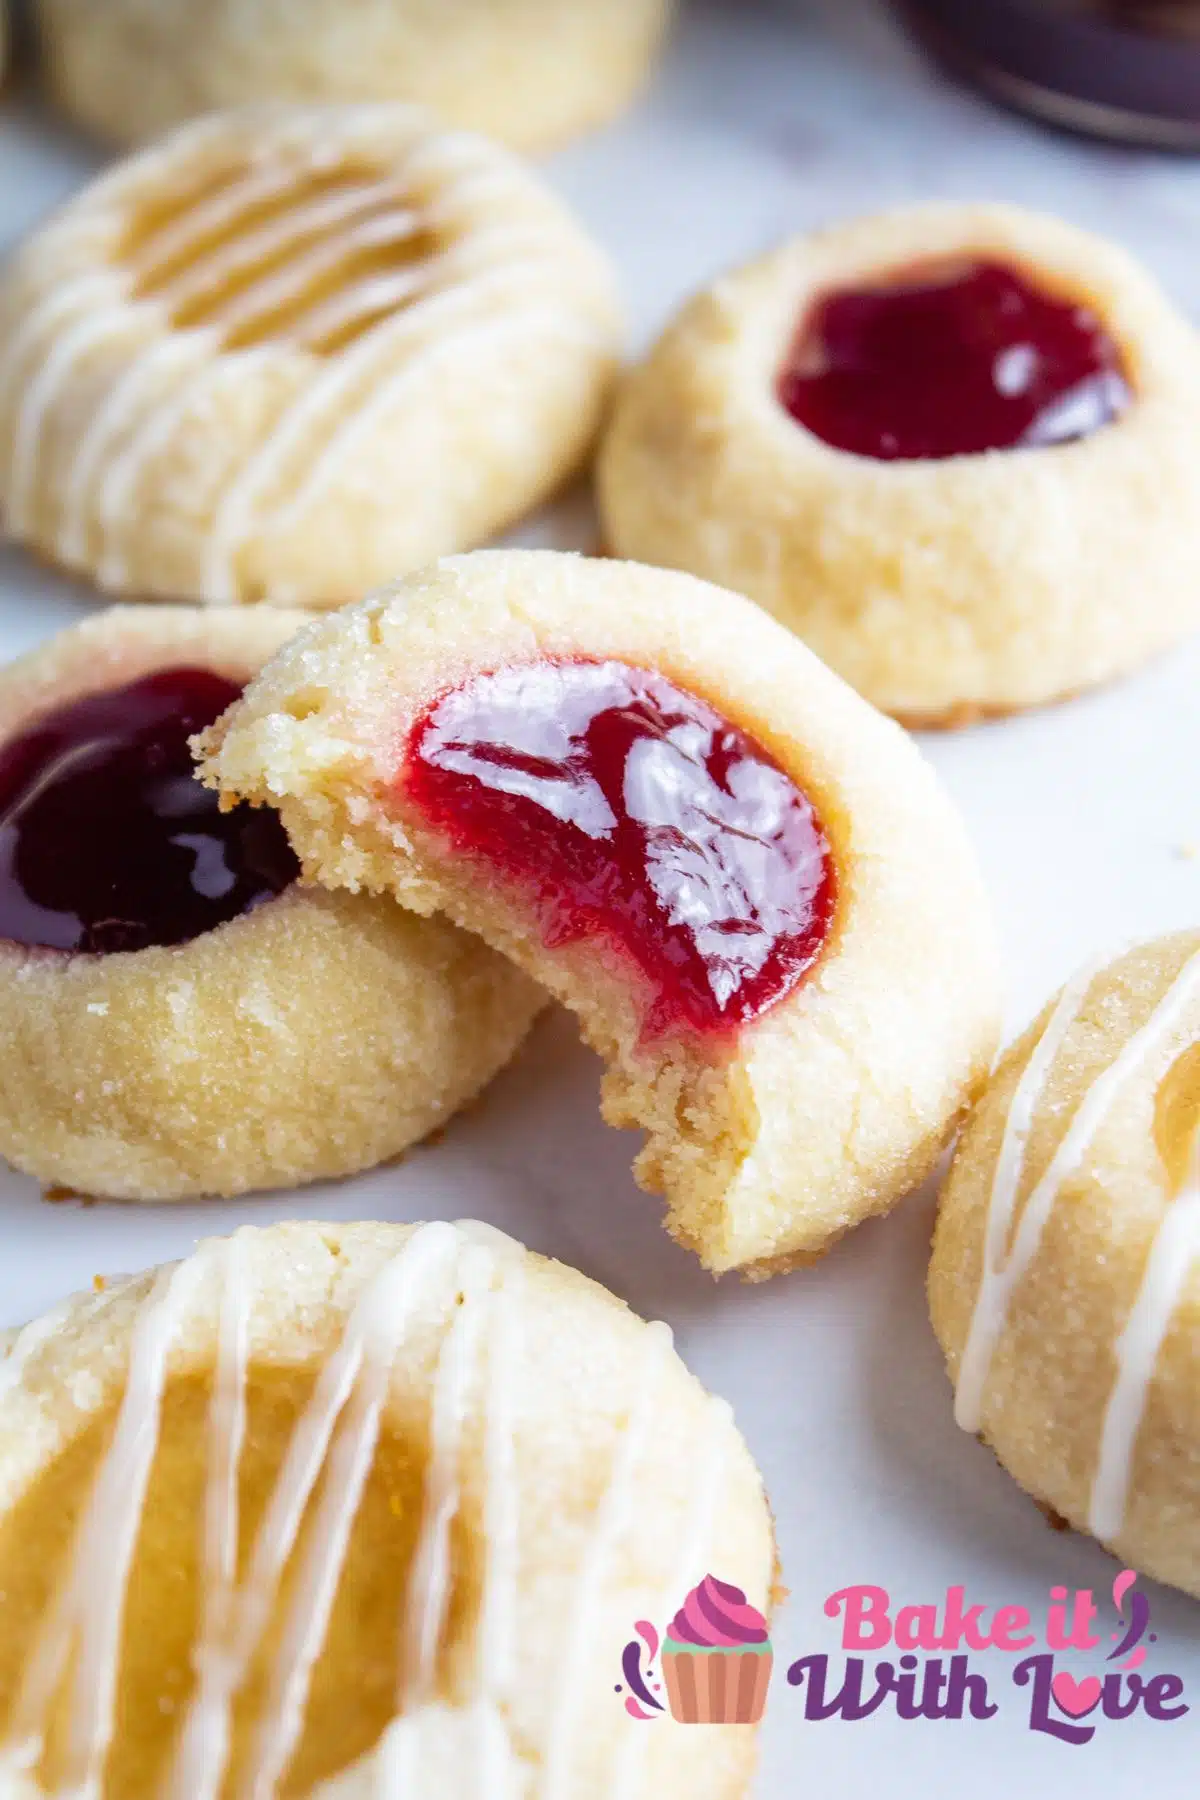 Tall image of thumbprint cookies on a plate.